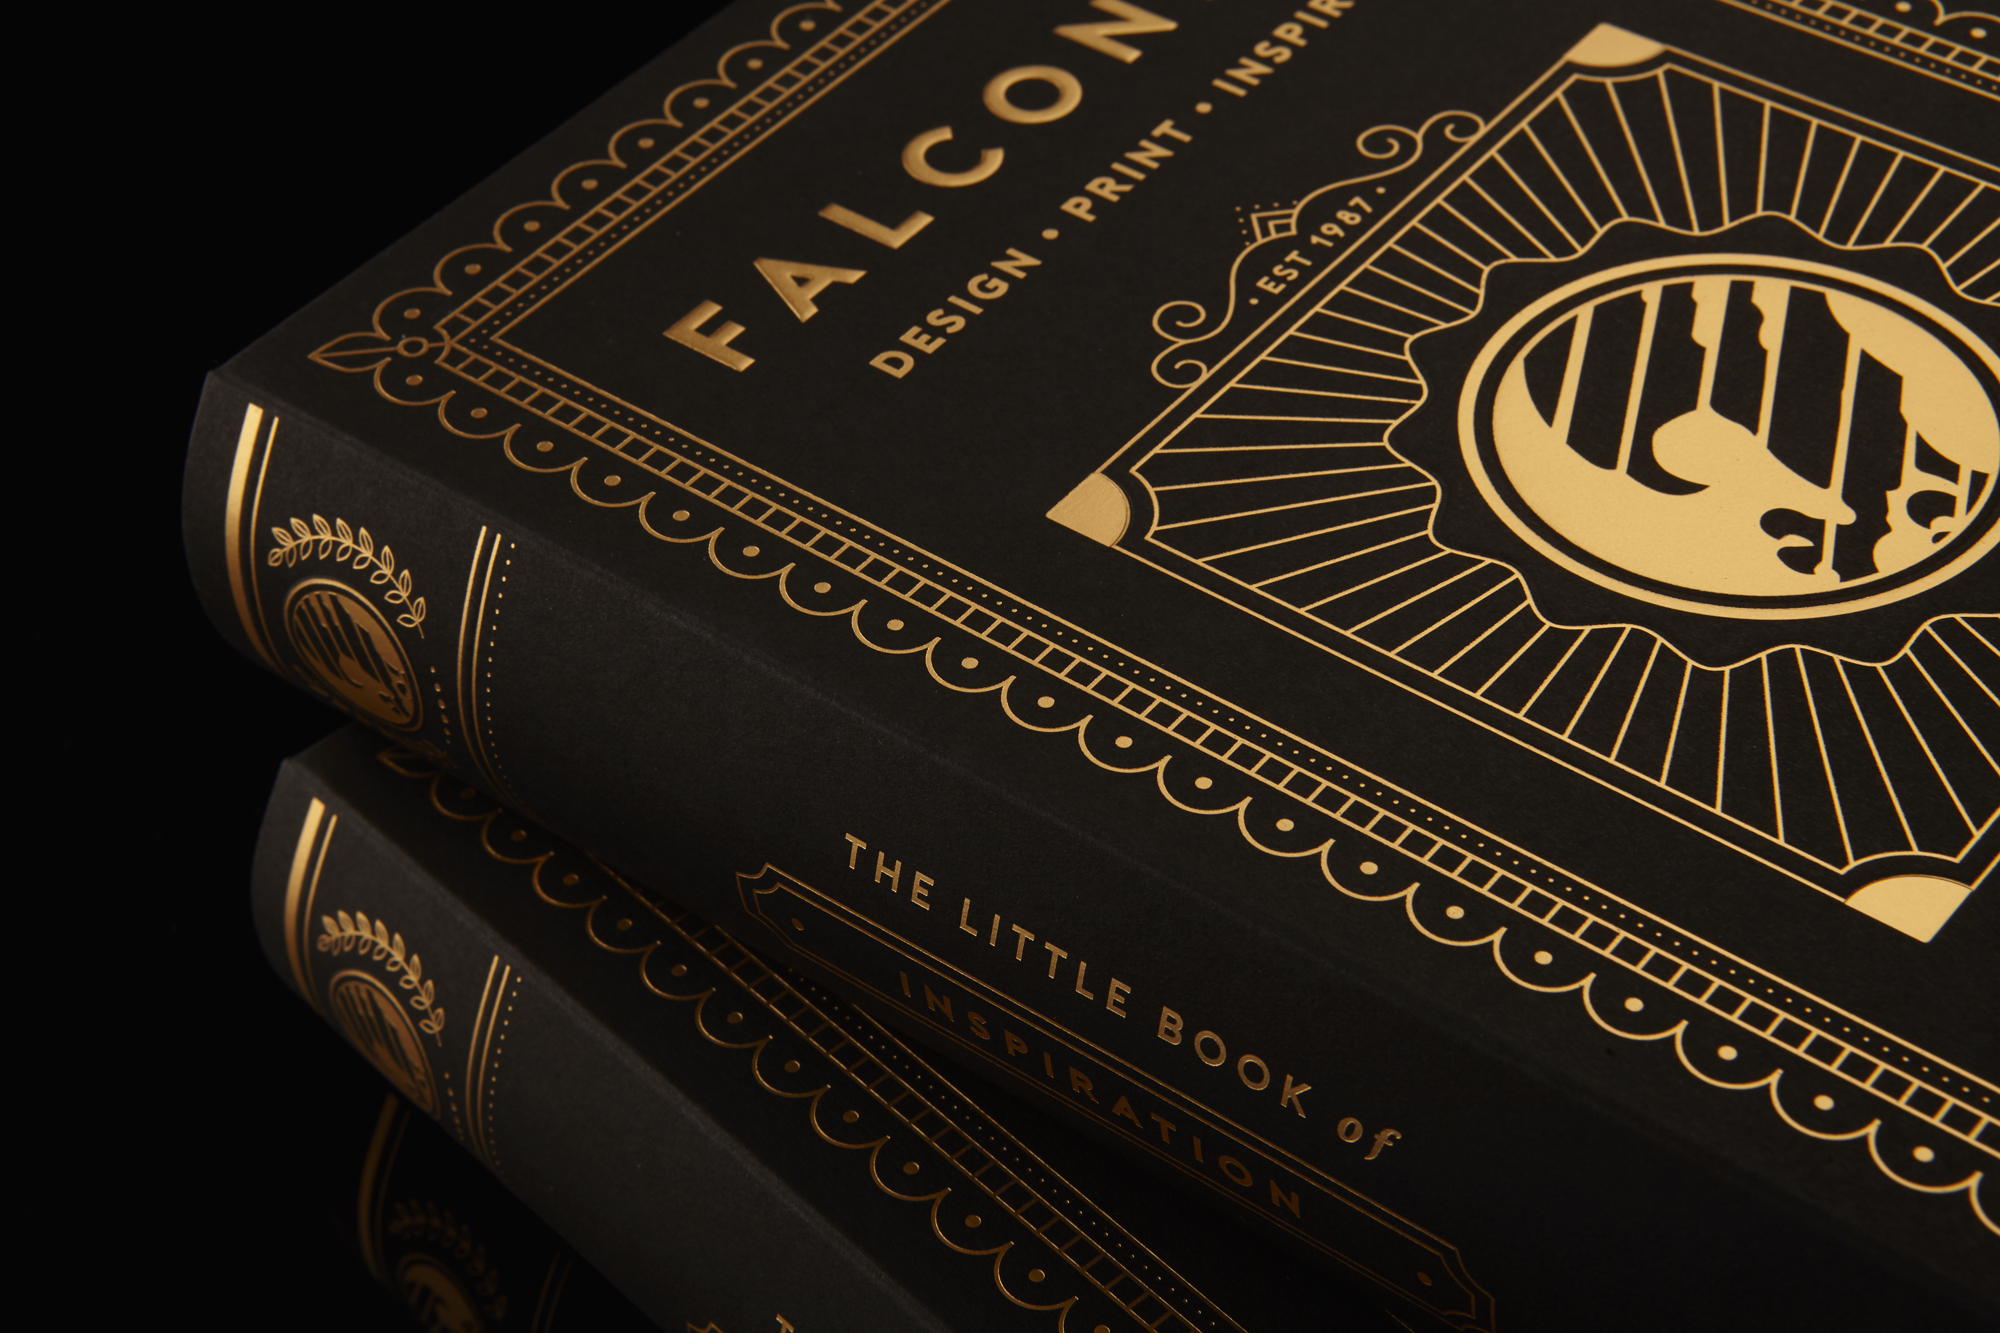 Falconer Print & Packaging Ltd inspire clients and potential clients